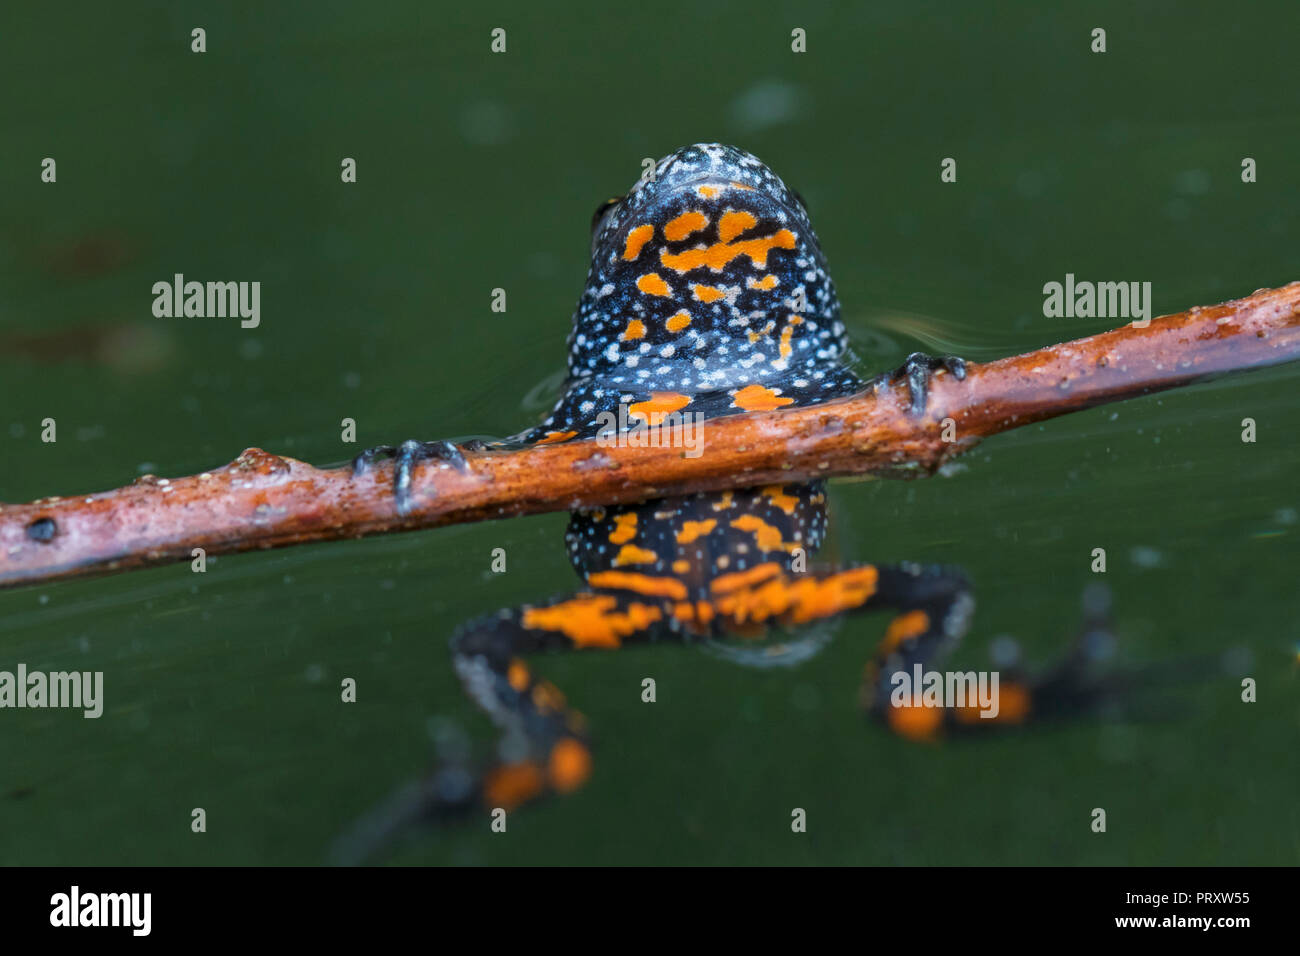 European fire-bellied toad (Bombina bombina) in pond, native to mainland Europe, showing orange spots on underside Stock Photo